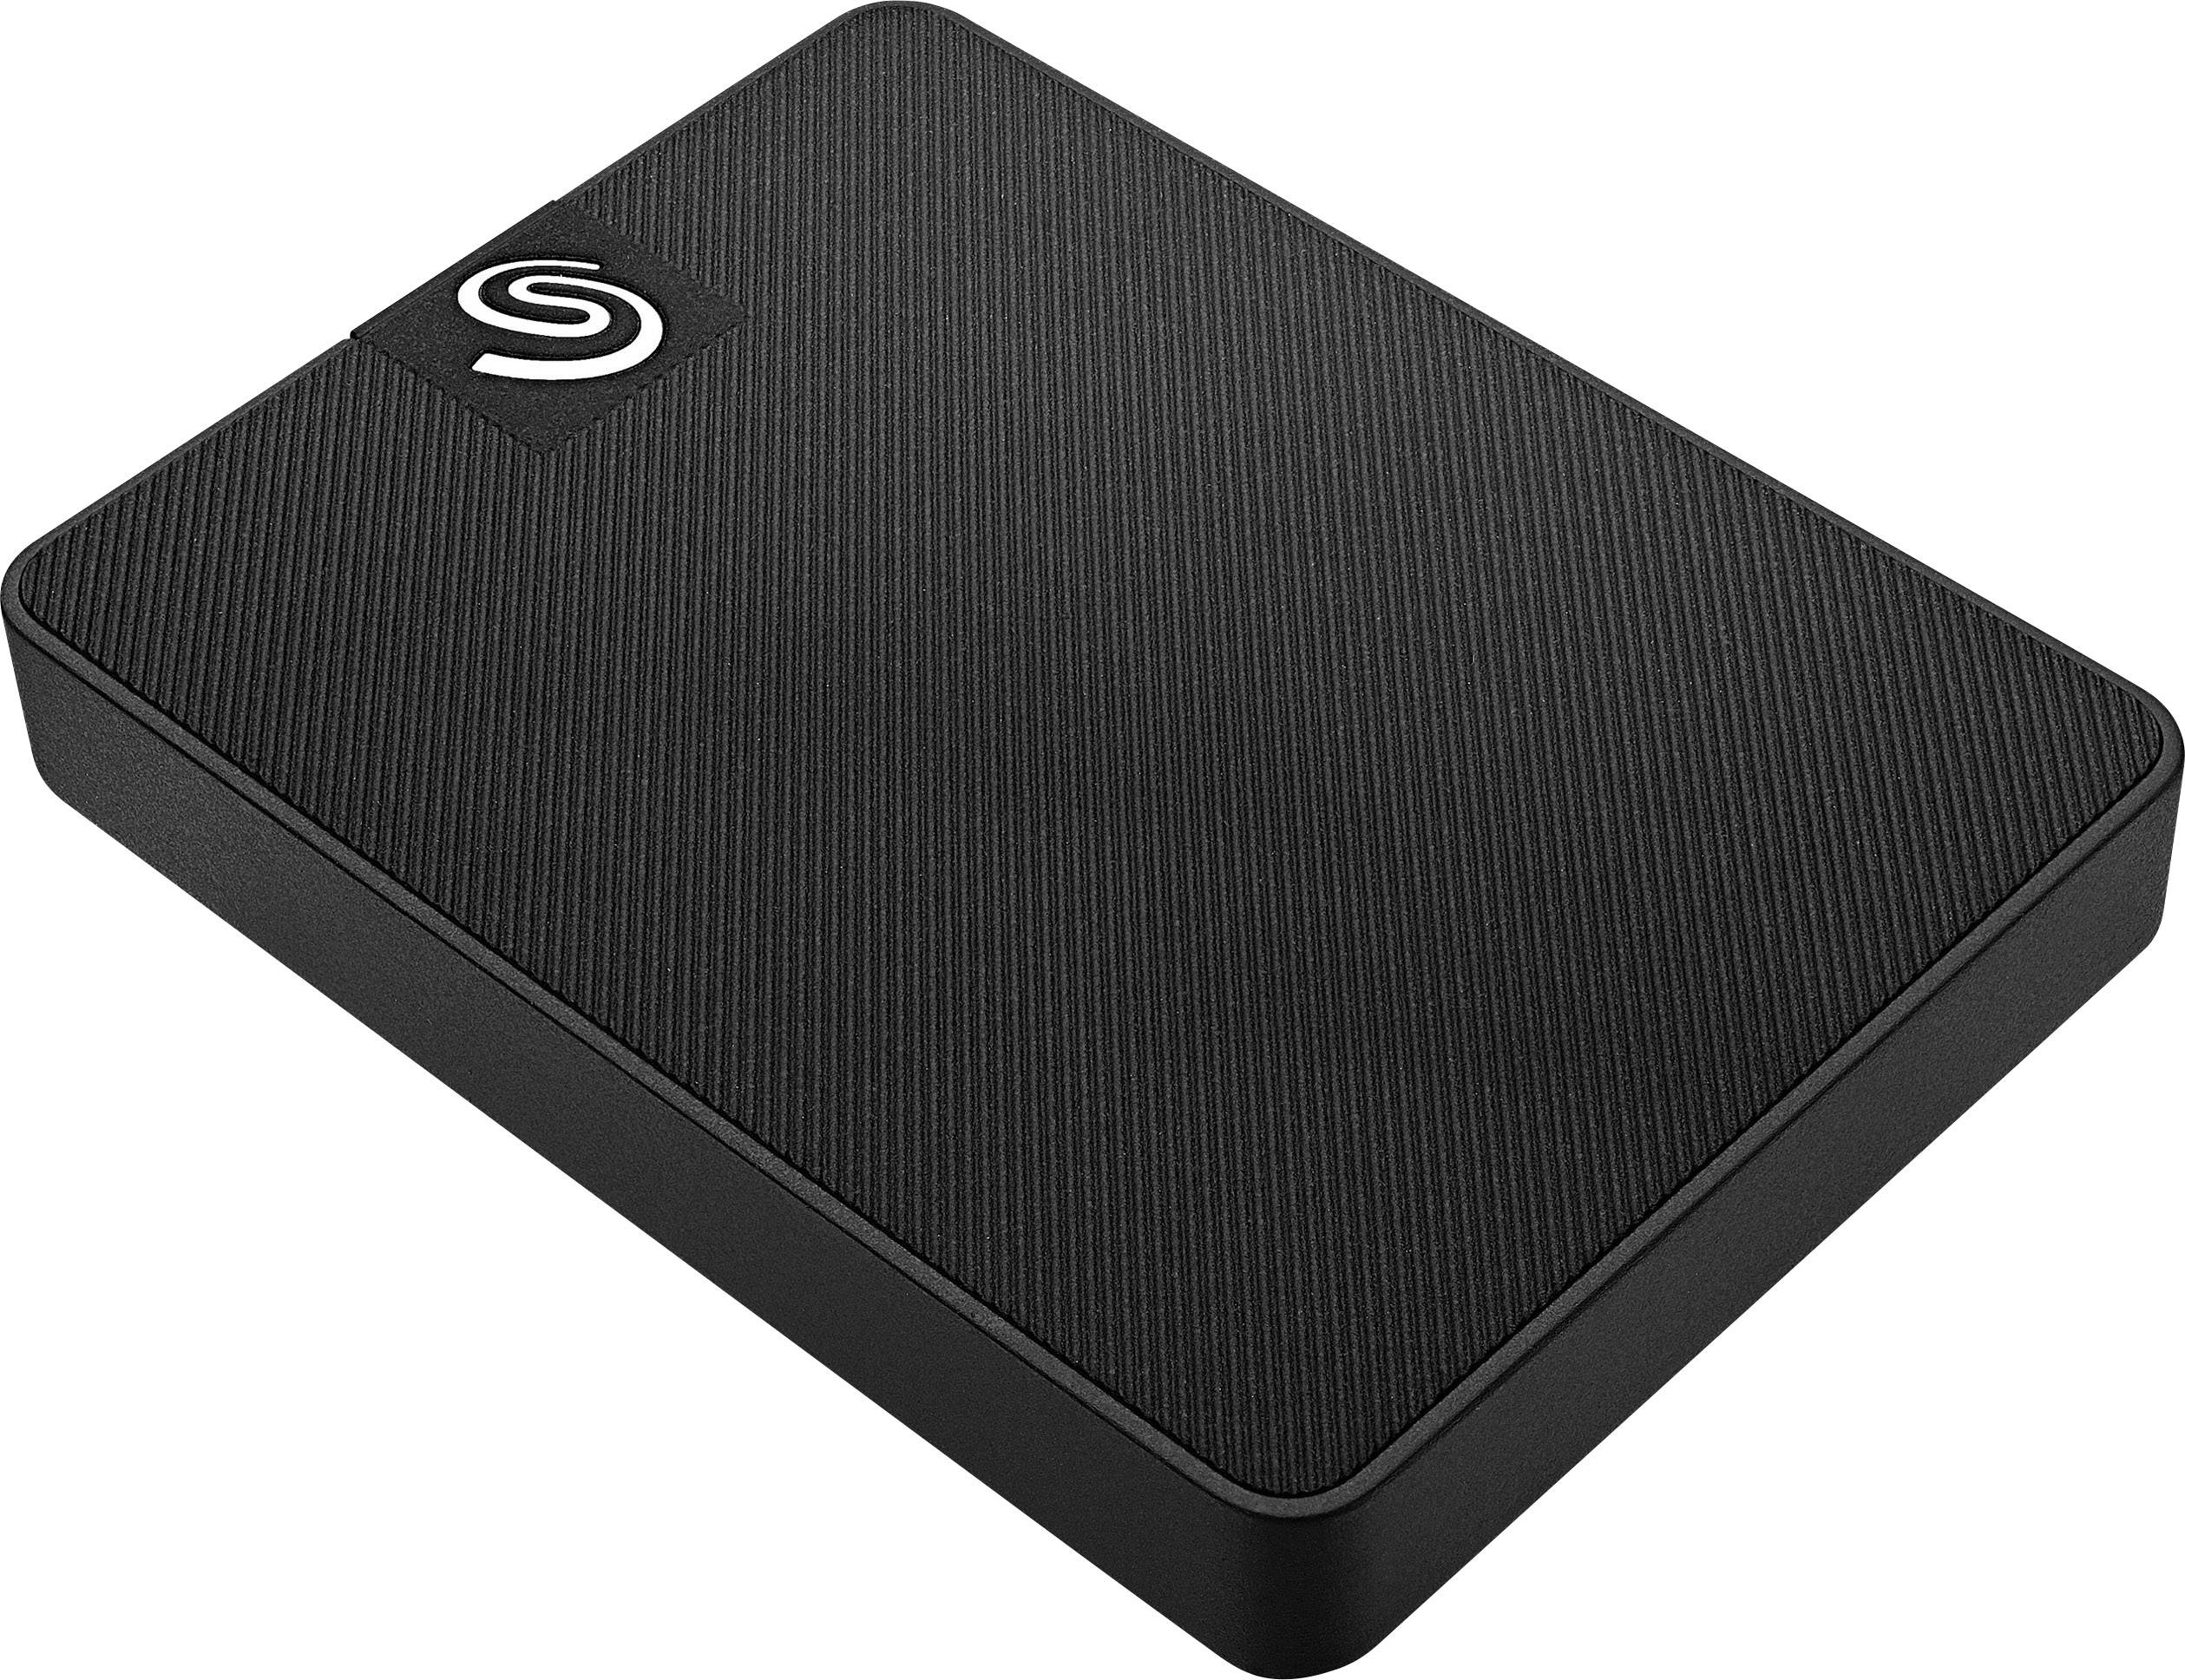 format seagate expansion drive for mac in windows 7